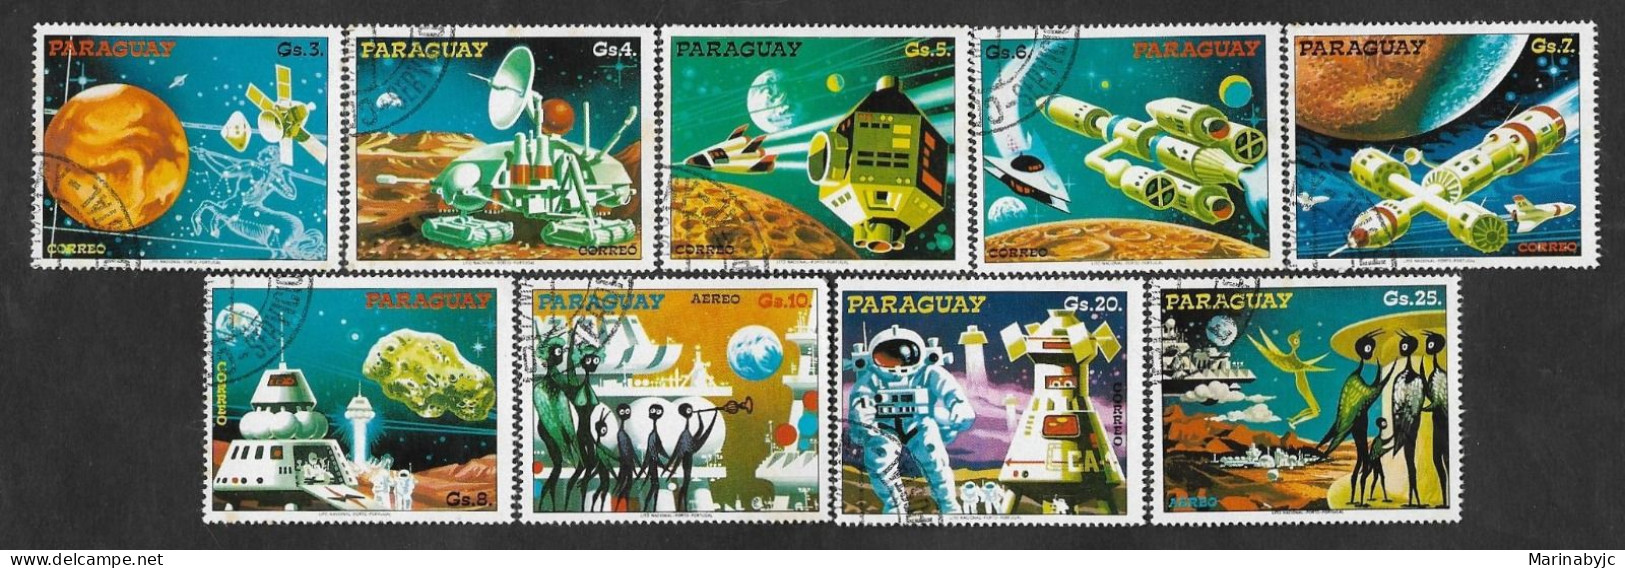 SD)1978 PARAGUAY SPACE SERIES, FUTURE SPACE PROJECTS, 9 CTO STAMPS - Paraguay